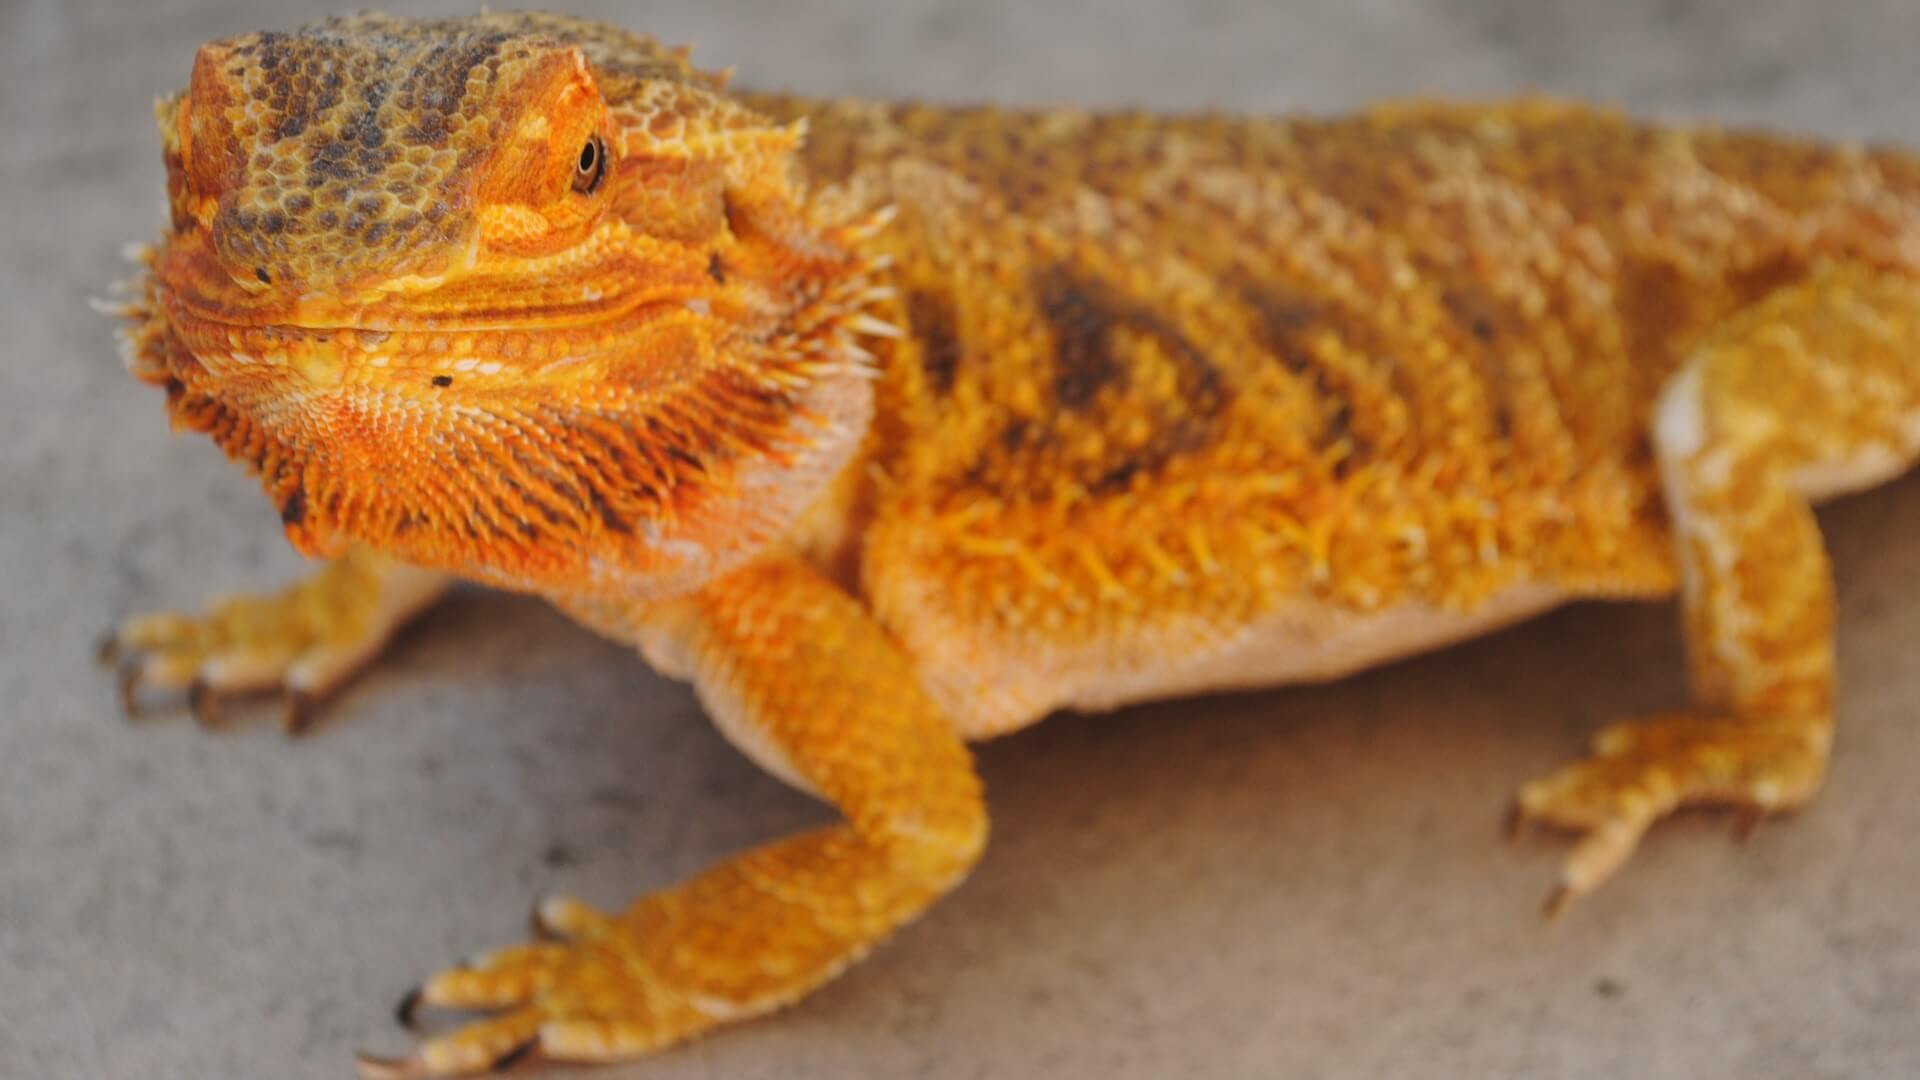 Closeup of bearded dragon named Tequila, orangey brown - photo